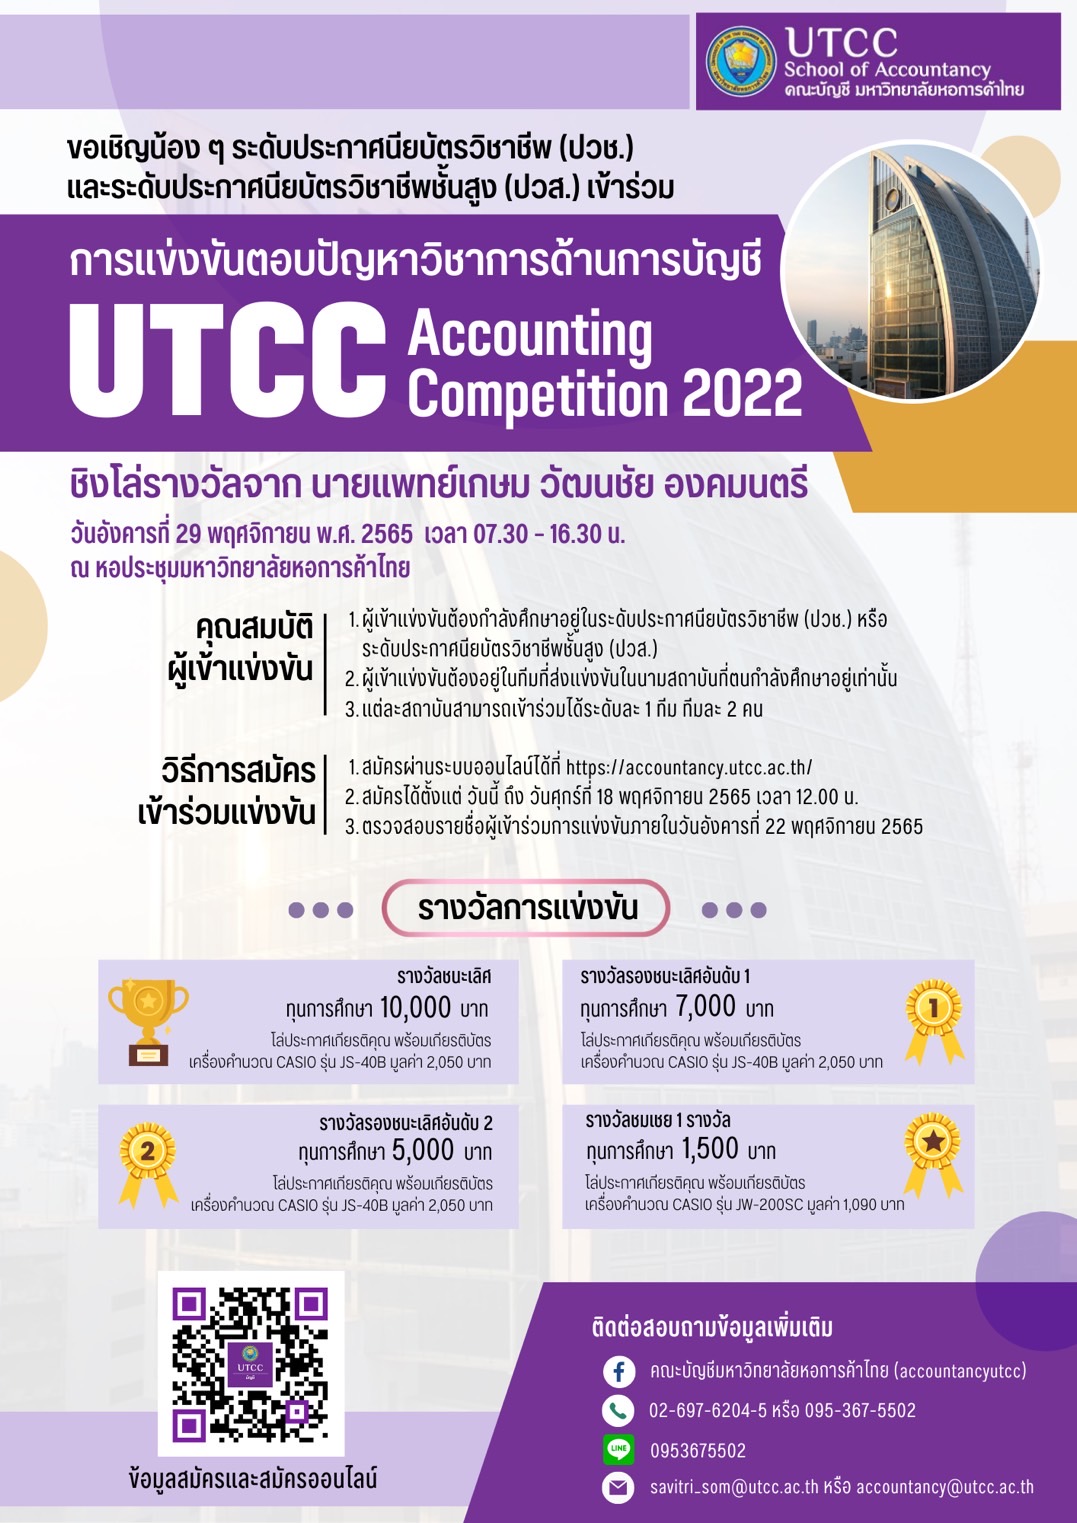 UTCC Accounting Competition 2022